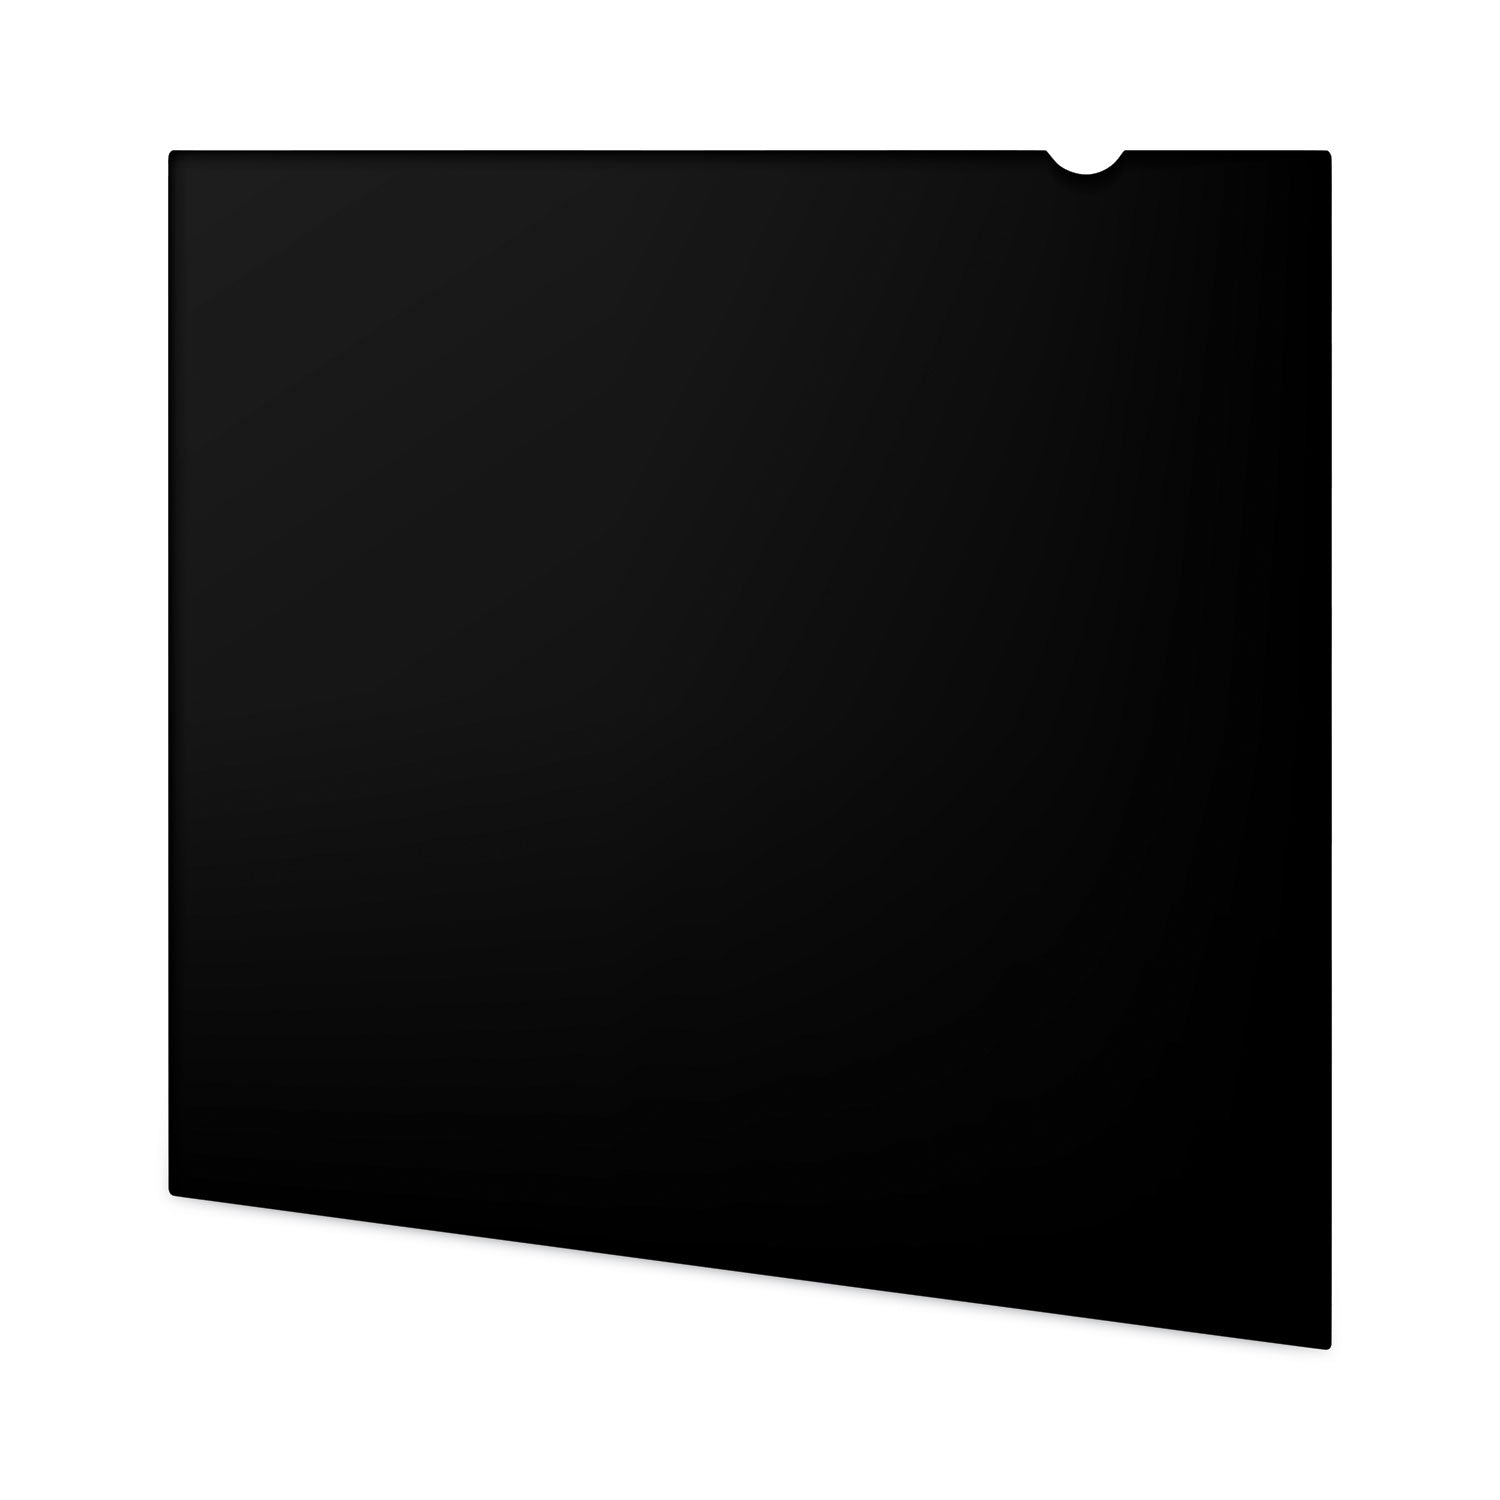 Blackout Privacy Filter for 17" Widescreen Flat Panel Monitor/Laptop, 16:10 Aspect Ratio - 